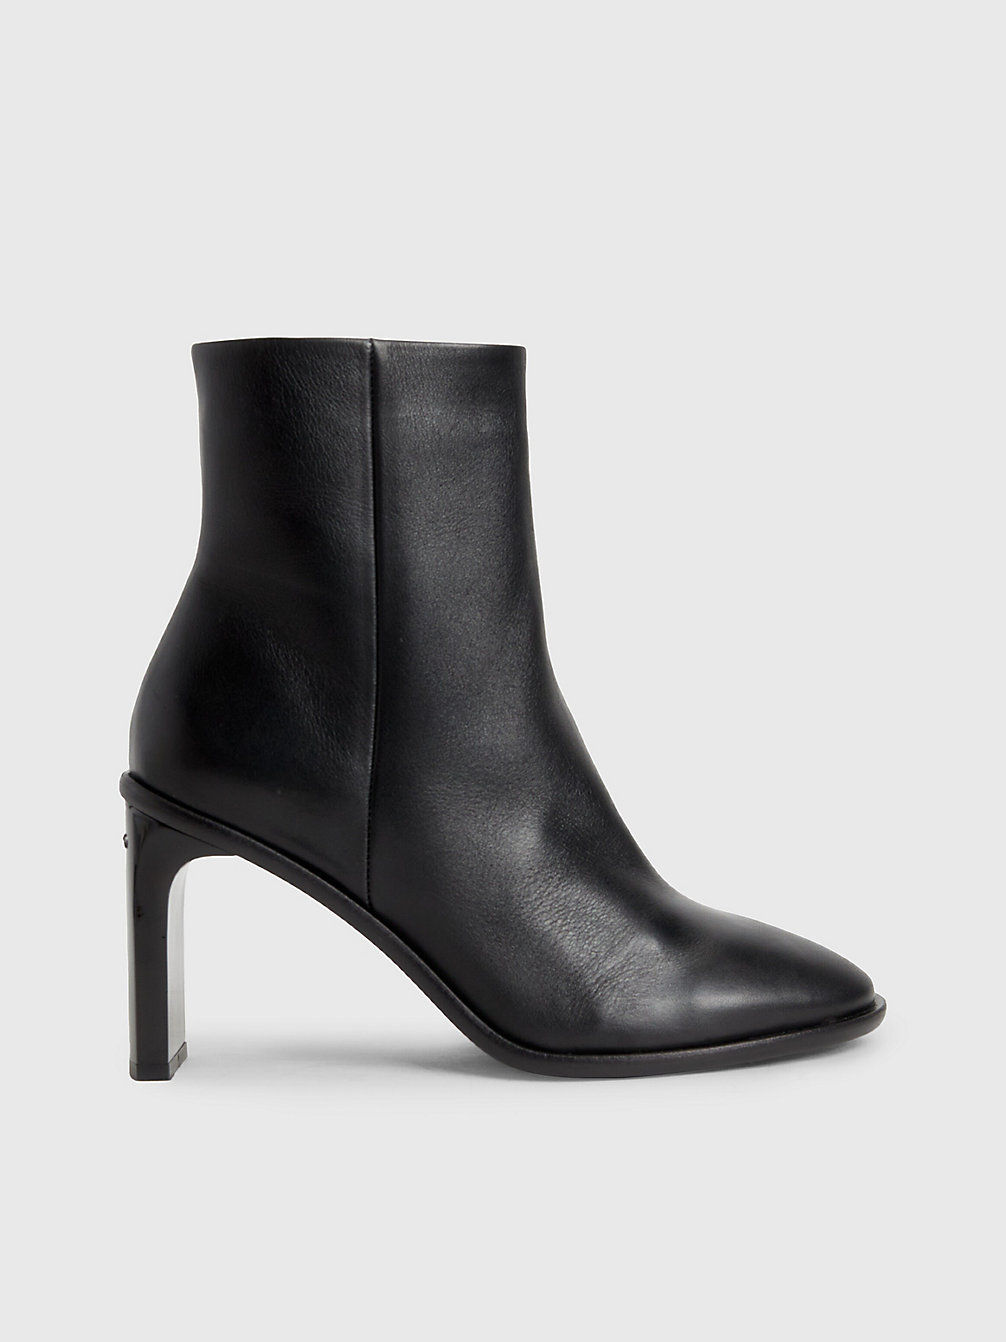 CK BLACK Leather Heeled Ankle Boots undefined women Calvin Klein